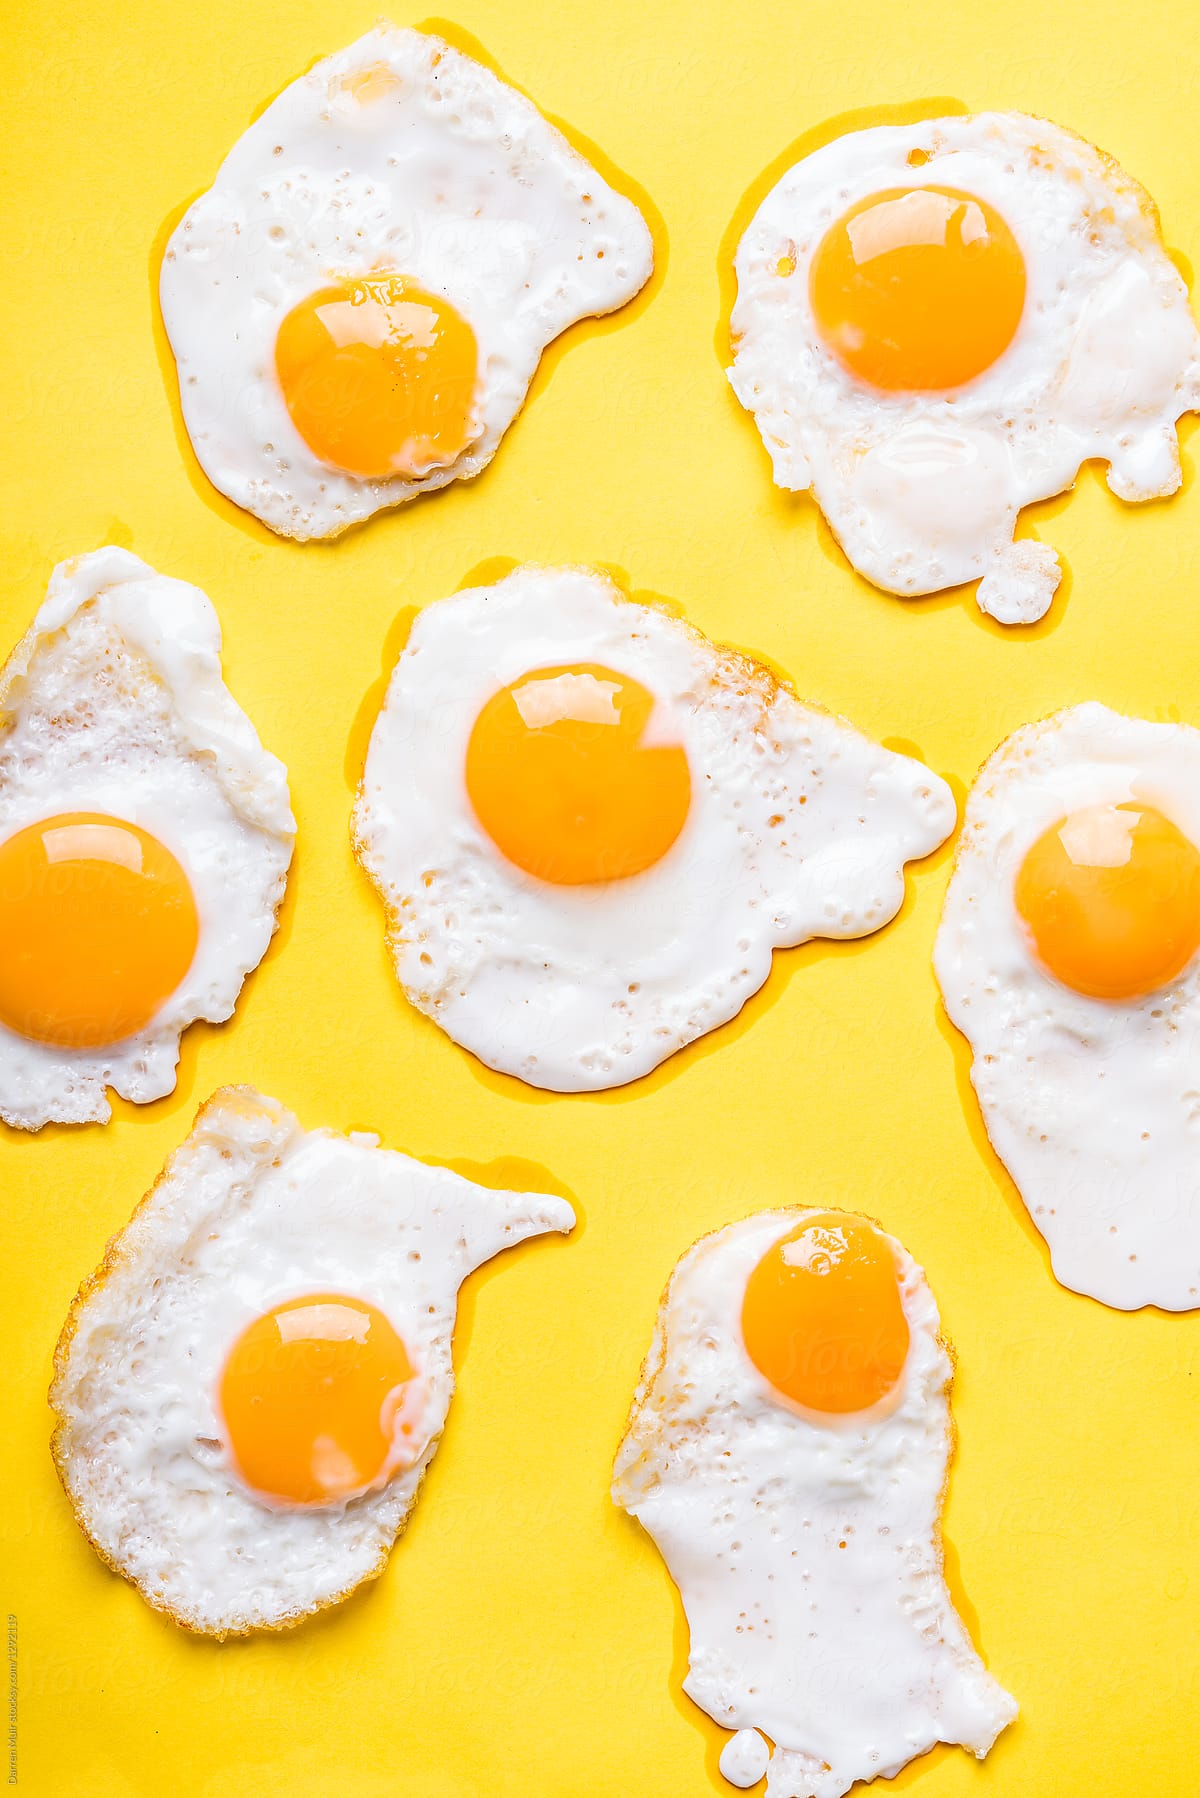 Fried Eggs On A Yellow Background.